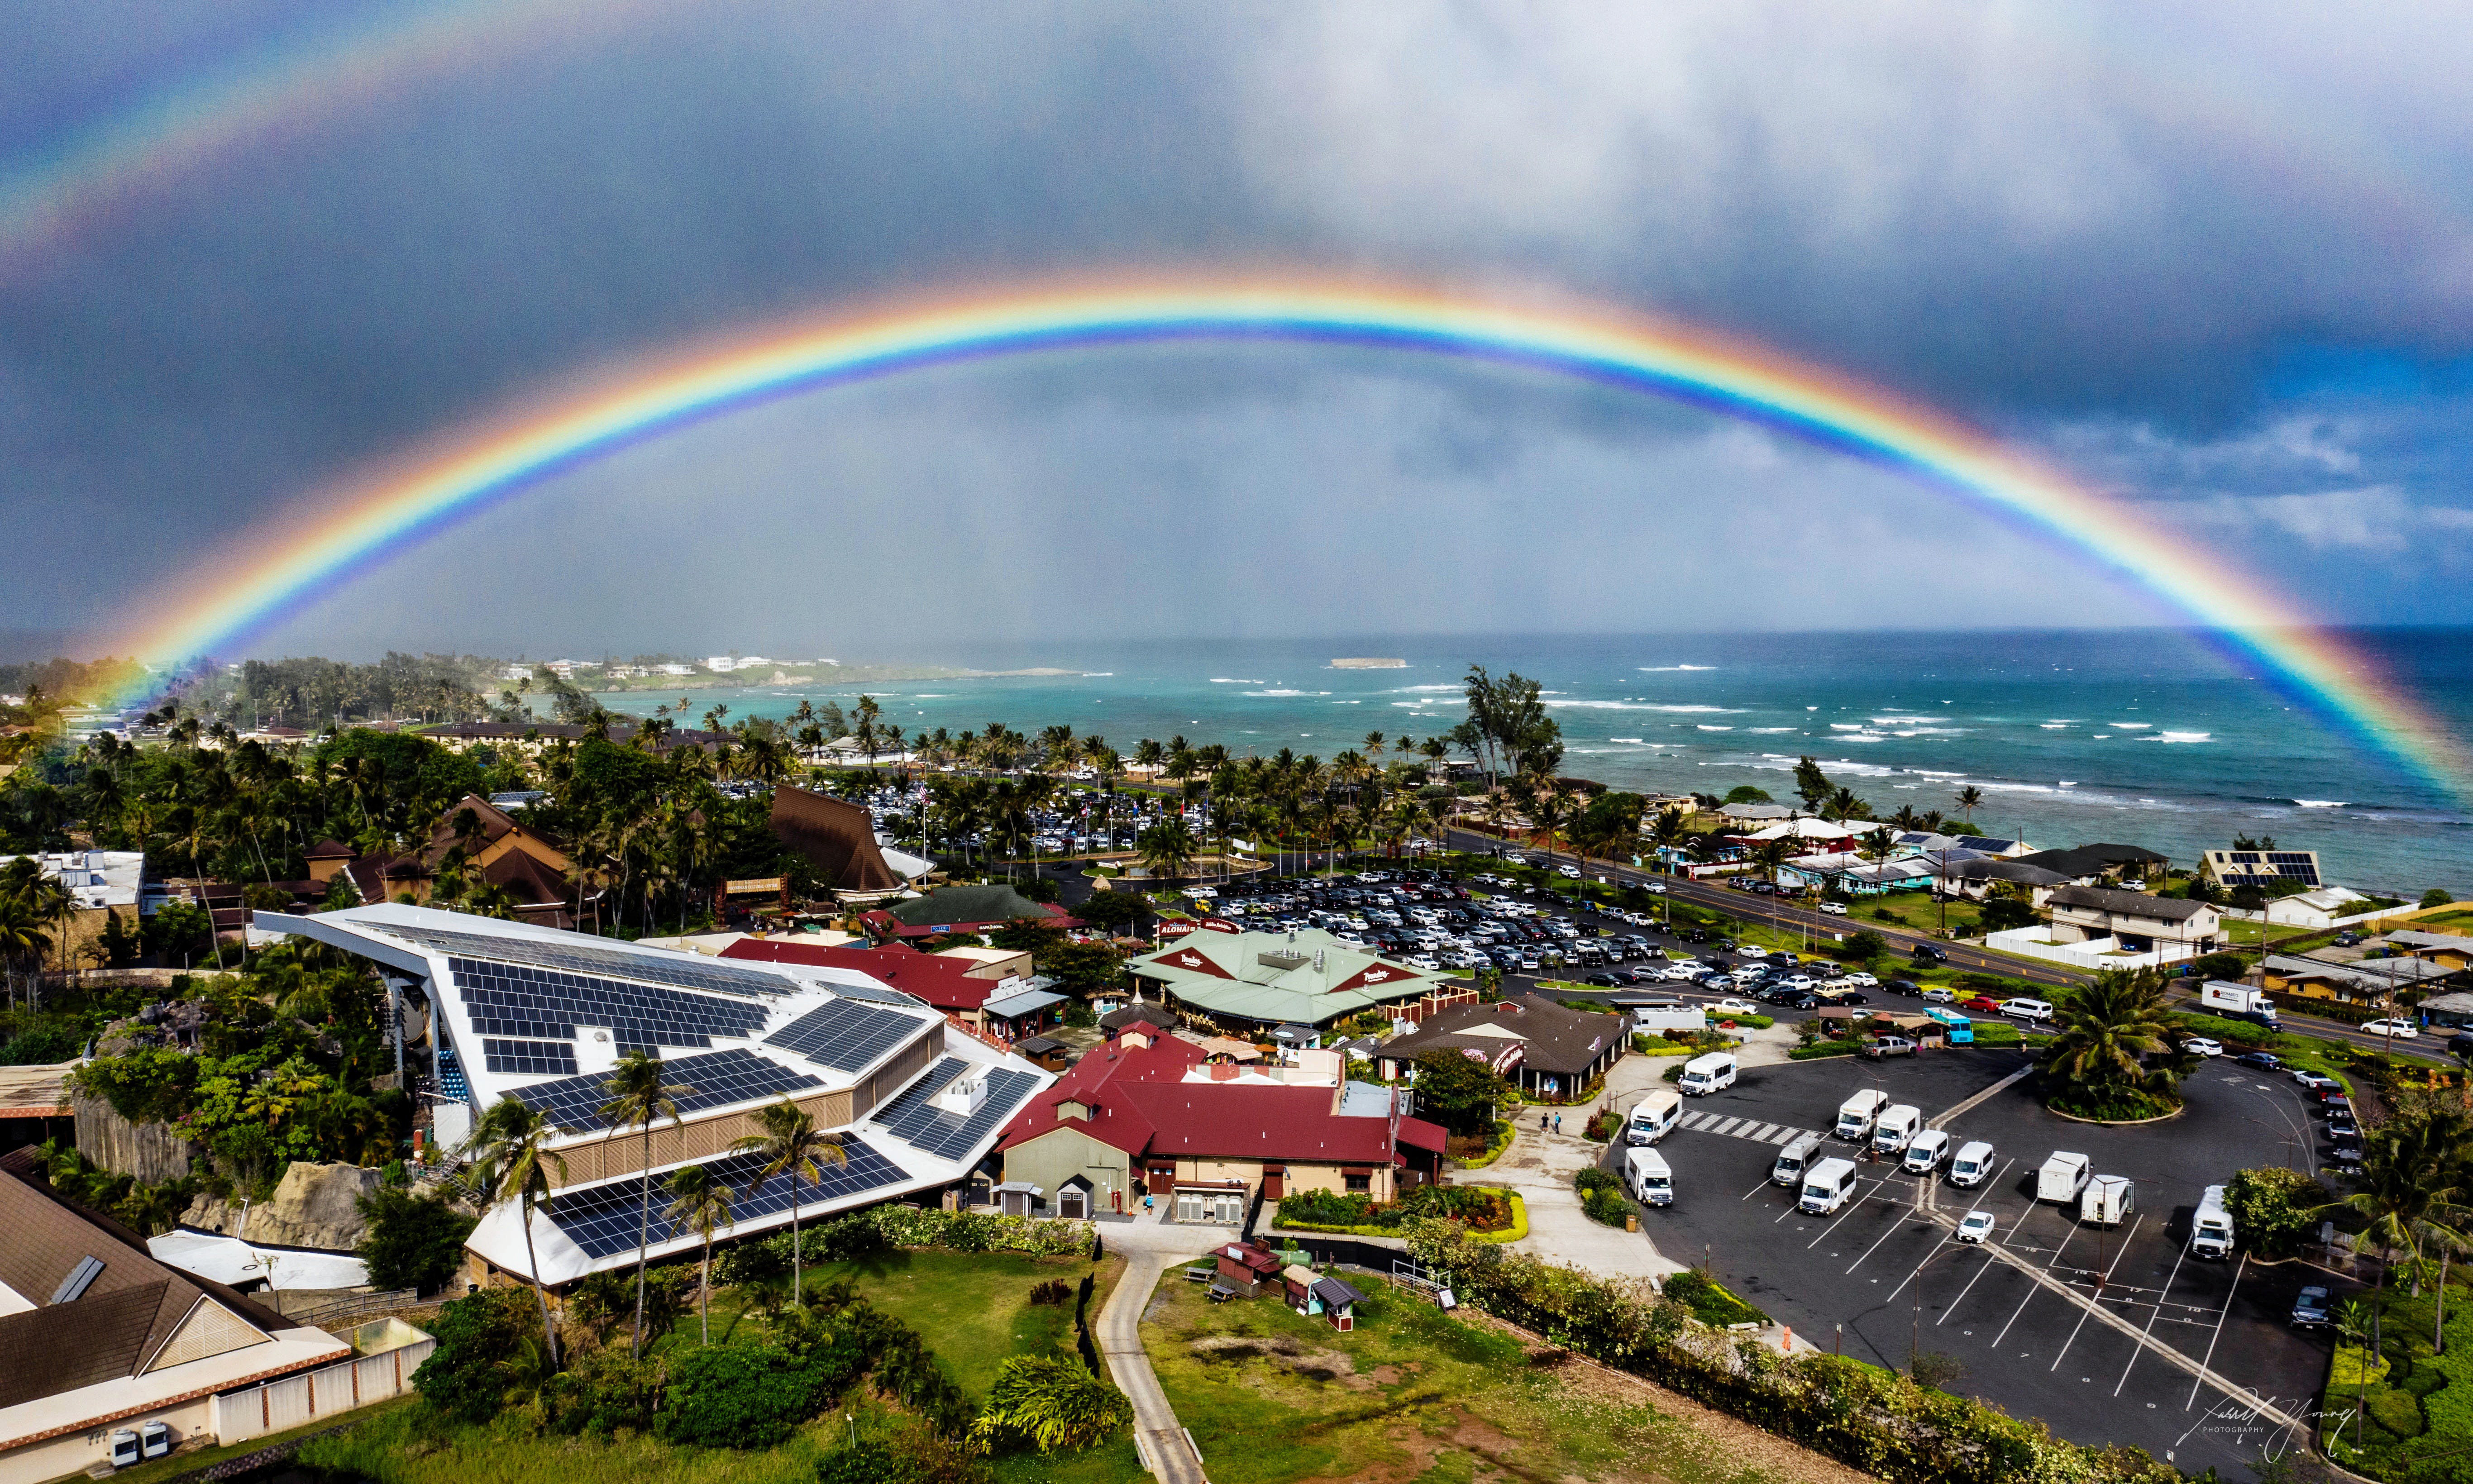 image shows the skyline surrounding the Polynesian Cultural Center with a viibrant rainbow and the ocean beyond